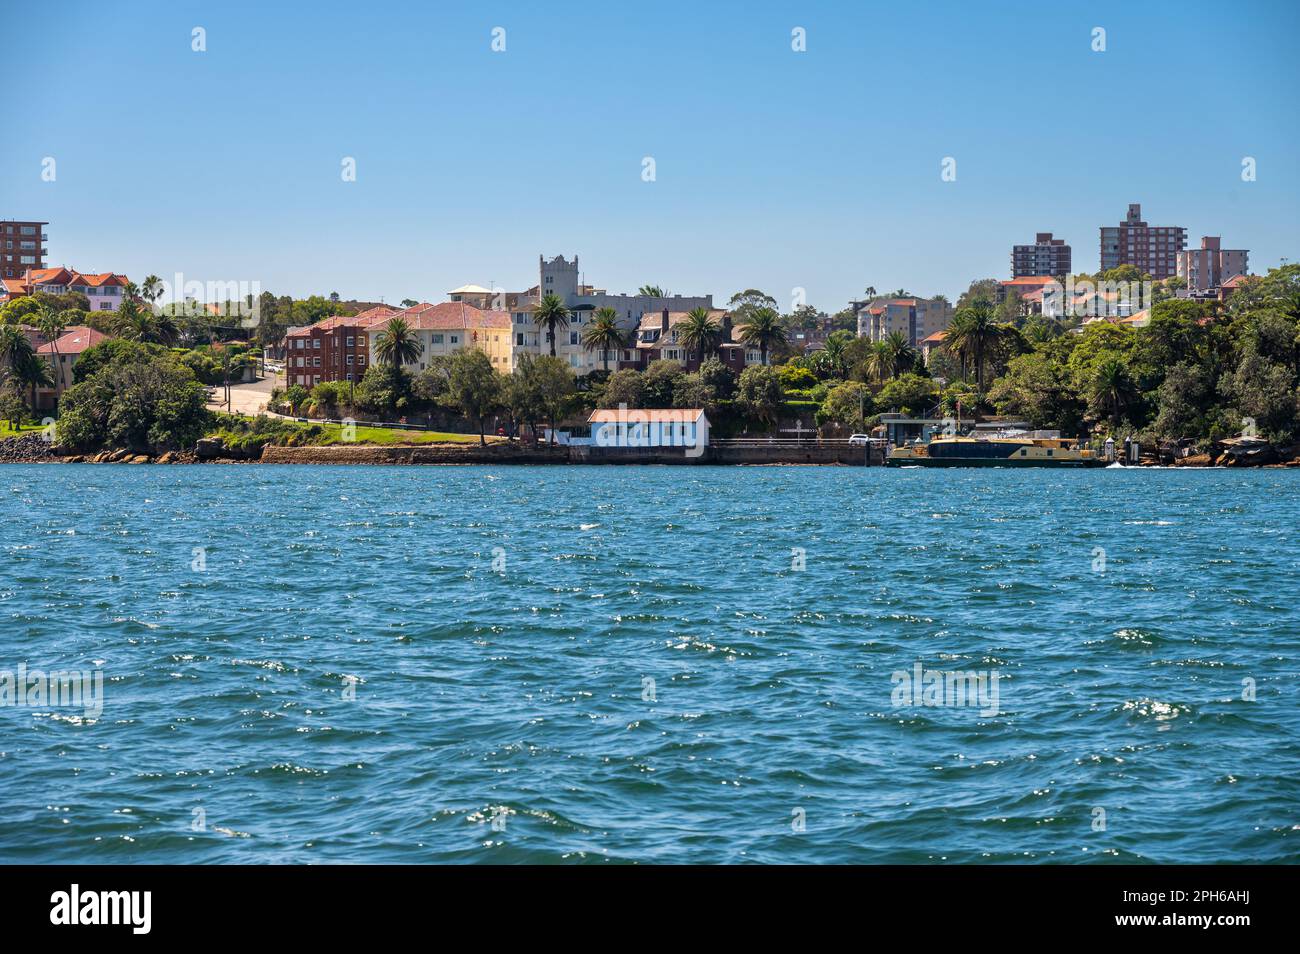 Cremorne Point Ferry Wharf on the Sydney Harbour North Shore, New South Wales, Australia. Stock Photo